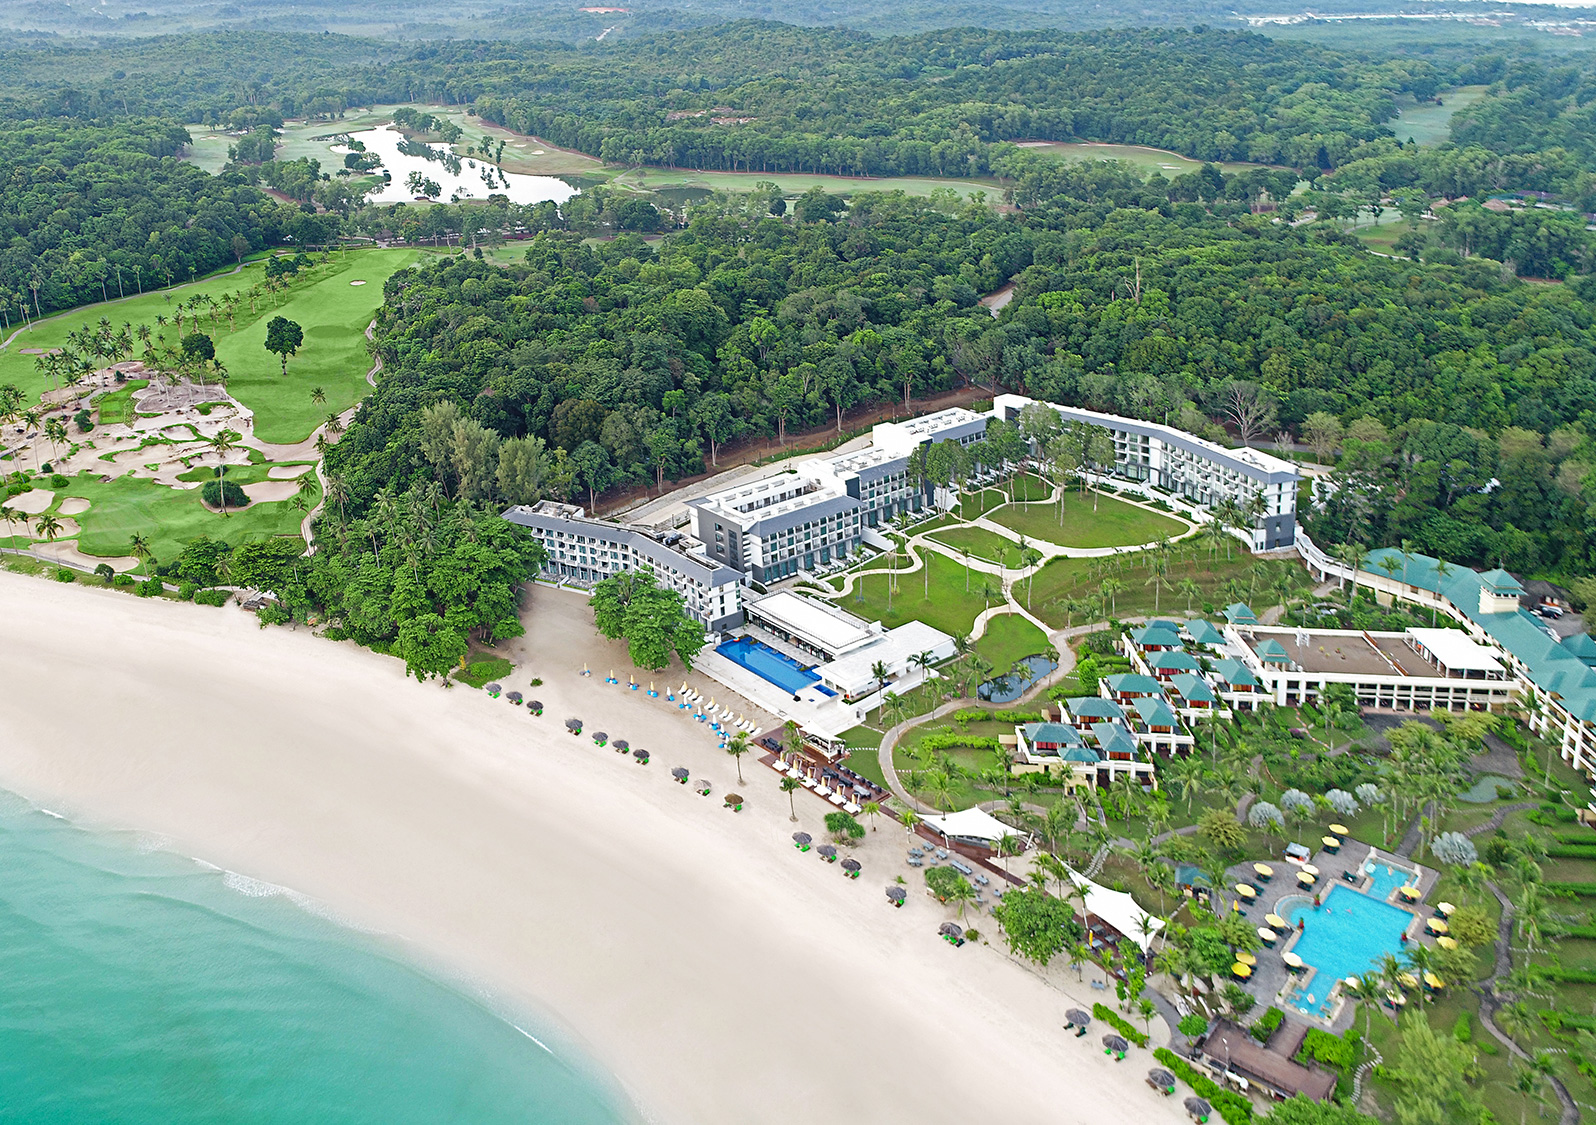 Cassia Residences Bintan | Aerial view of a beachfront resort beside a golf course surrounded by dense foliage.